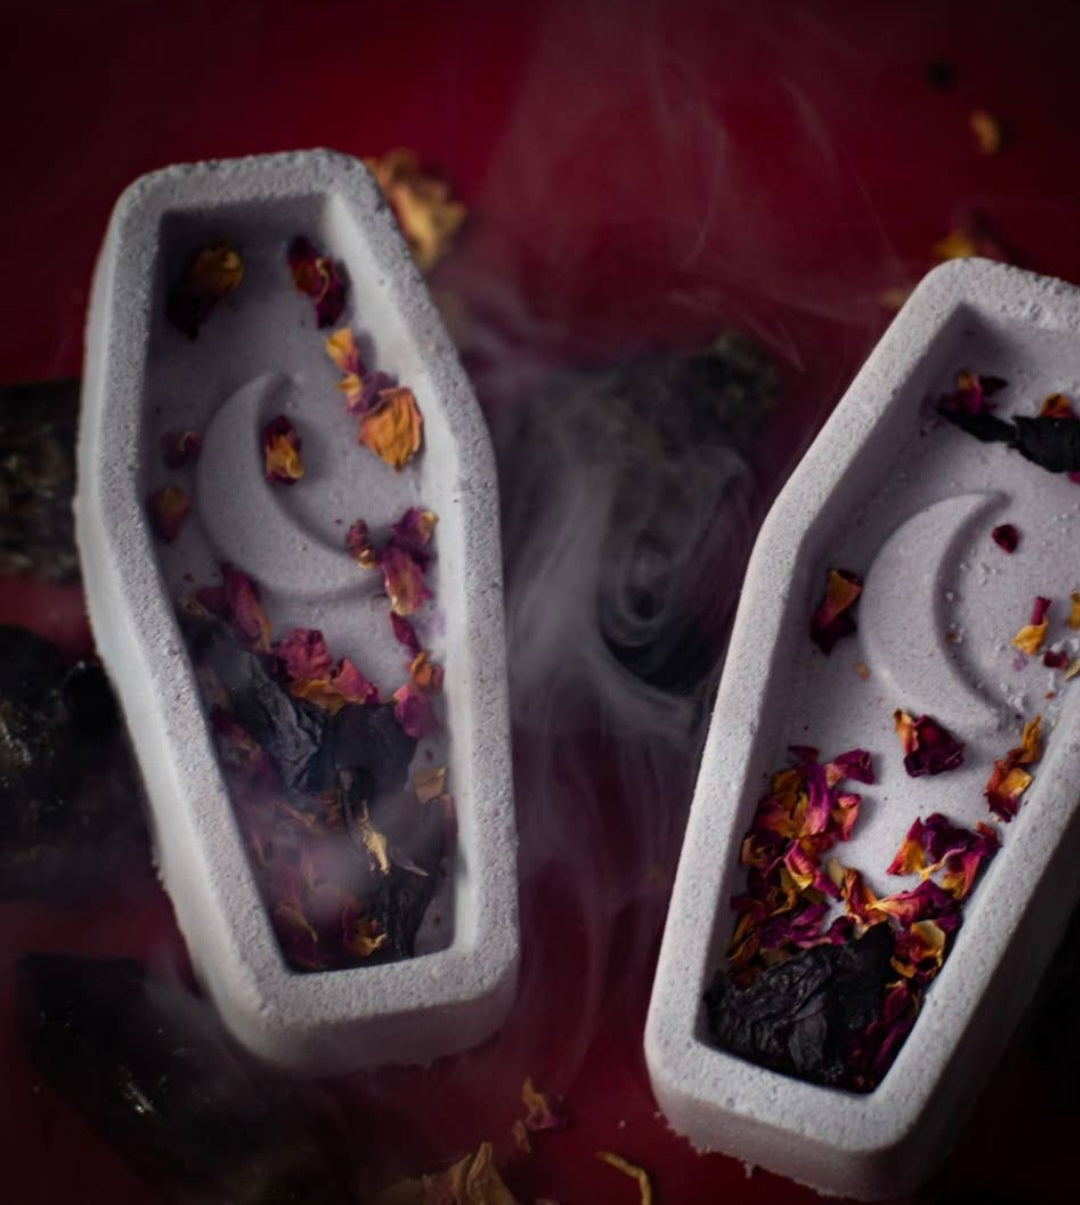 Moon Coffin Bed of Roses- Crystal Bath Bomb